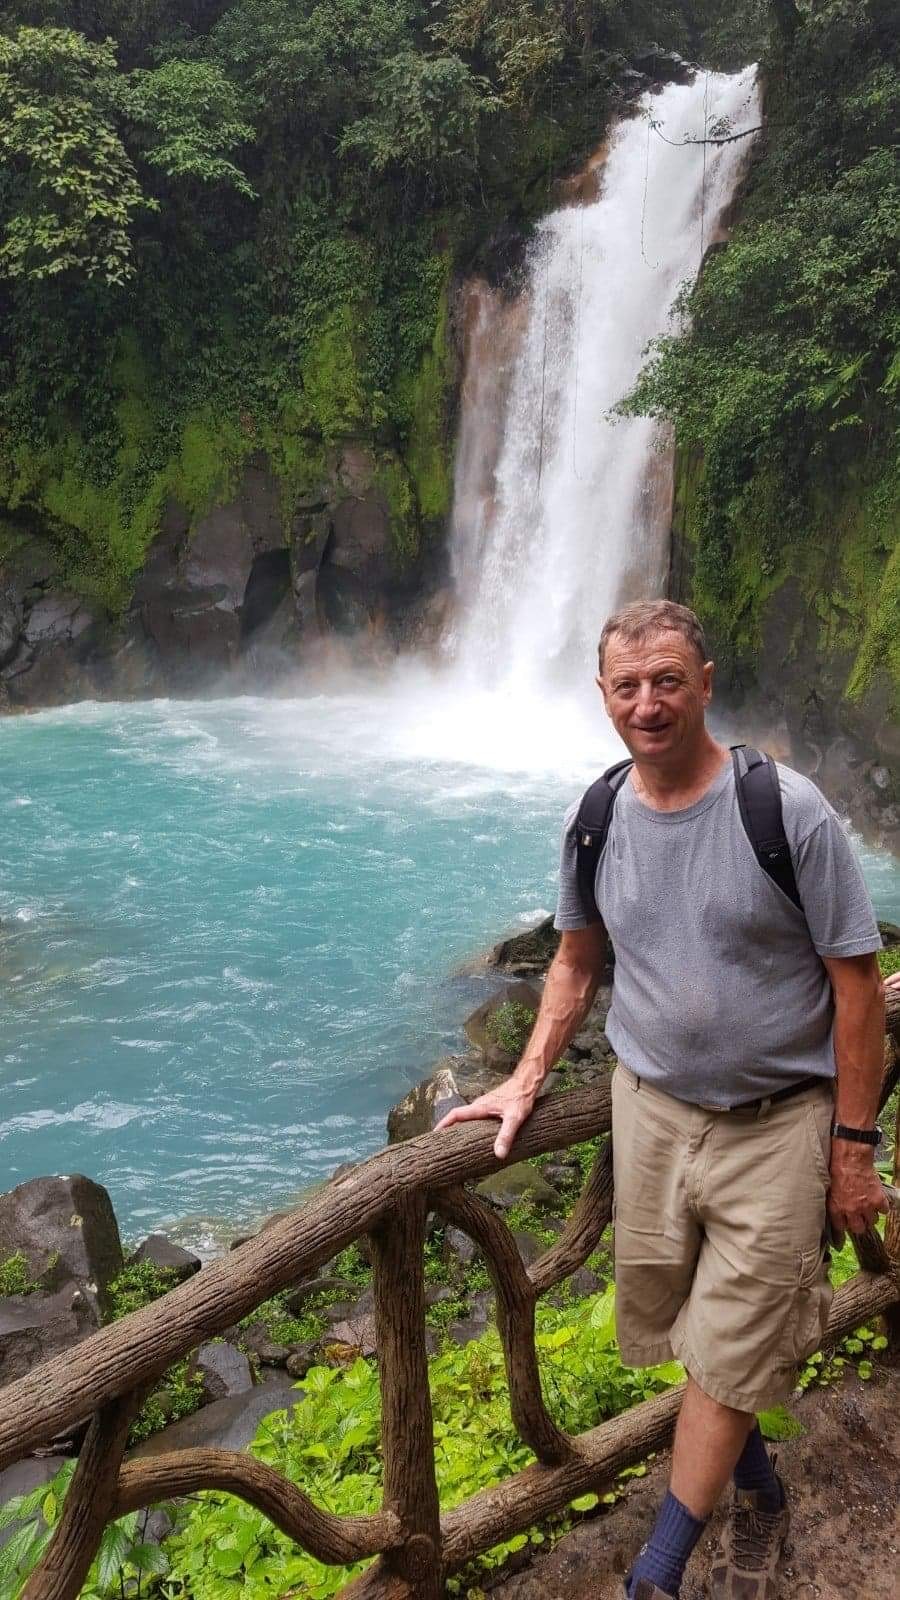 Man wearing a grey t-shirt and backpack holding onto a wooden rail in front of a waterfall that is falling into a light blue body of water.